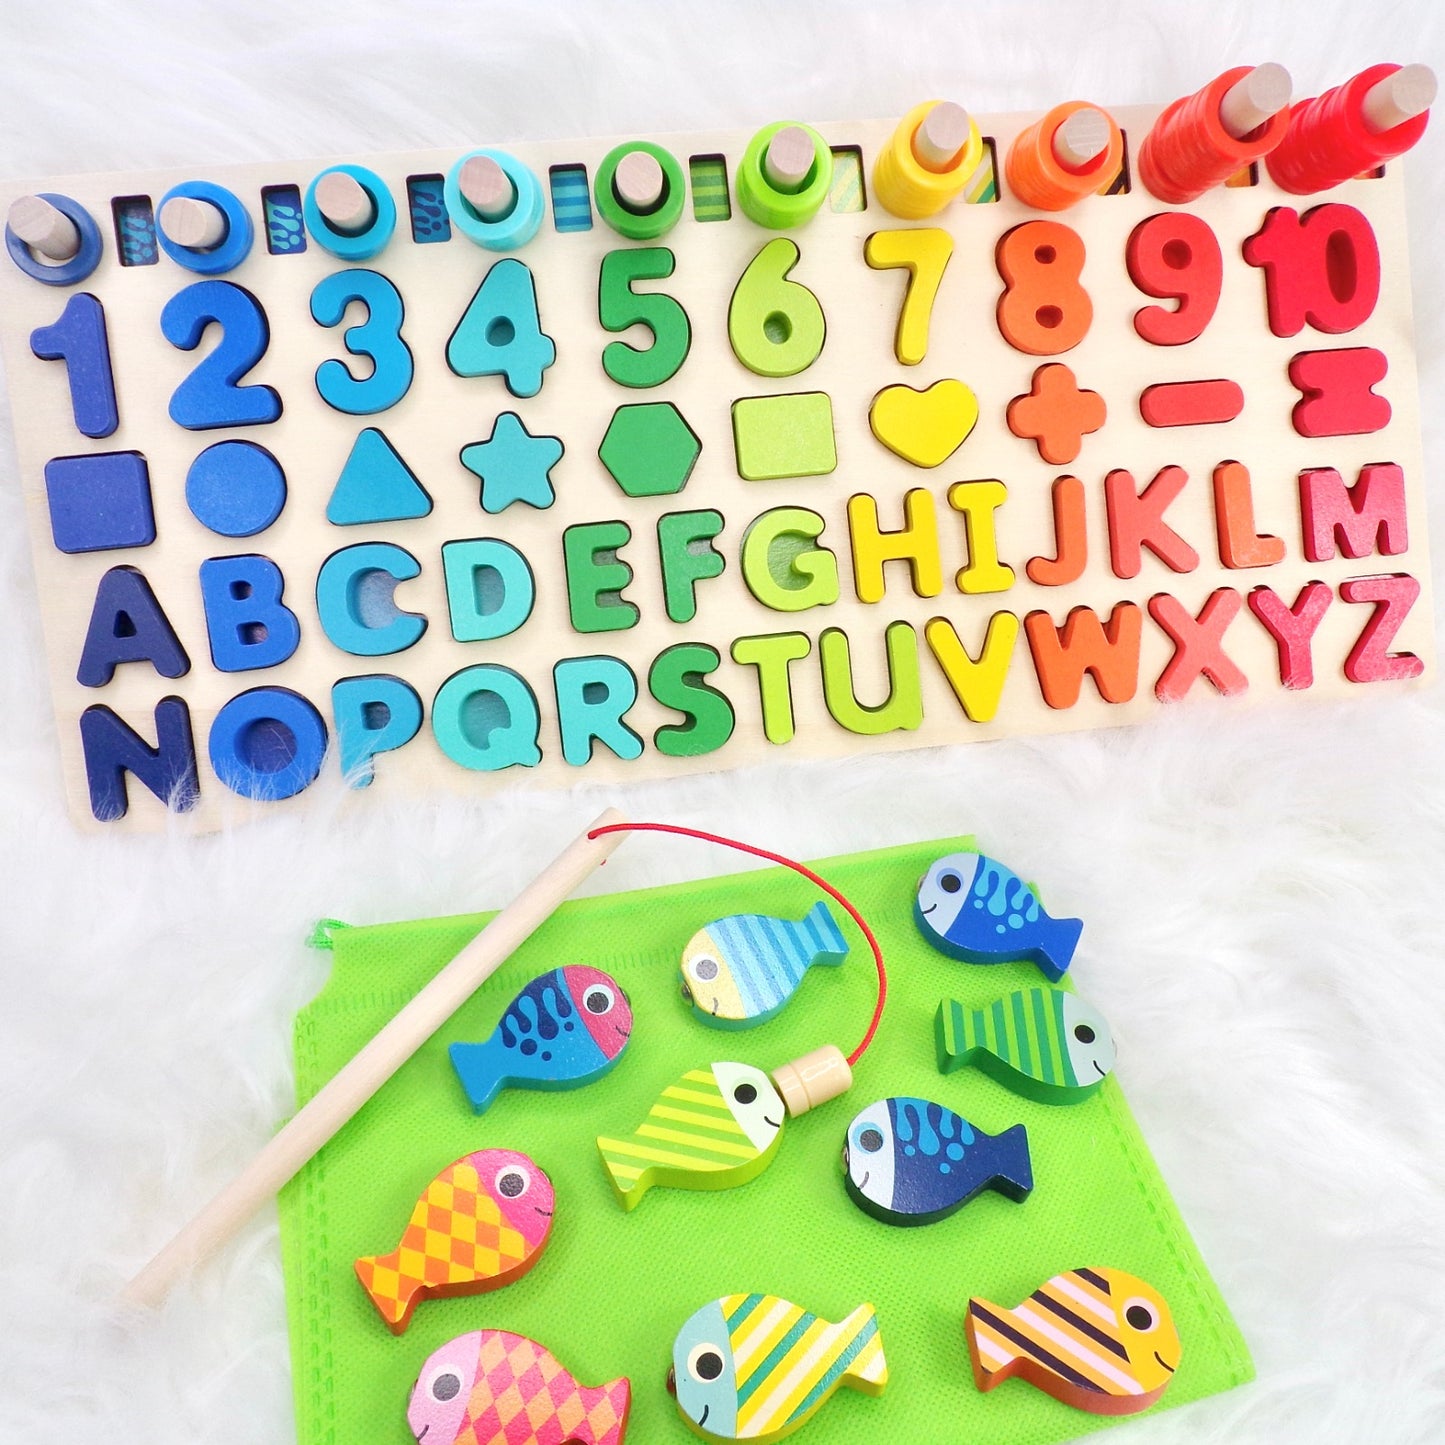 A multifunctional children’s wooden puzzle toy, featuring colourful shapes, numbers, counting rings and a magnetic fish game.